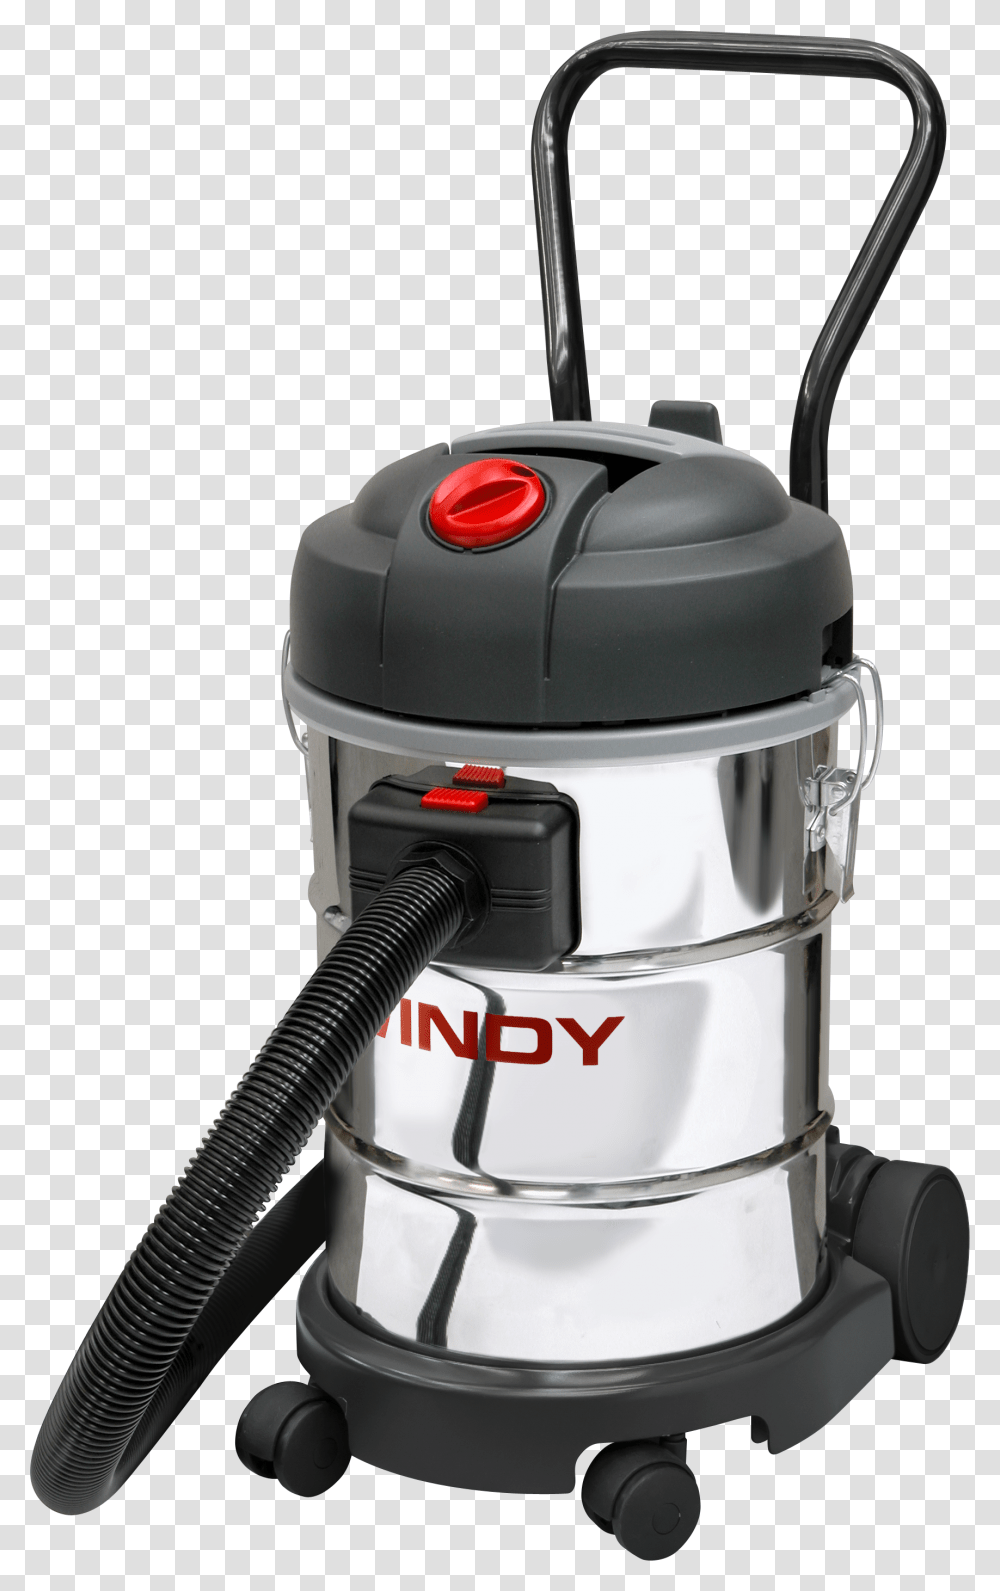 Windy 130 If, Appliance, Vacuum Cleaner, Mixer Transparent Png